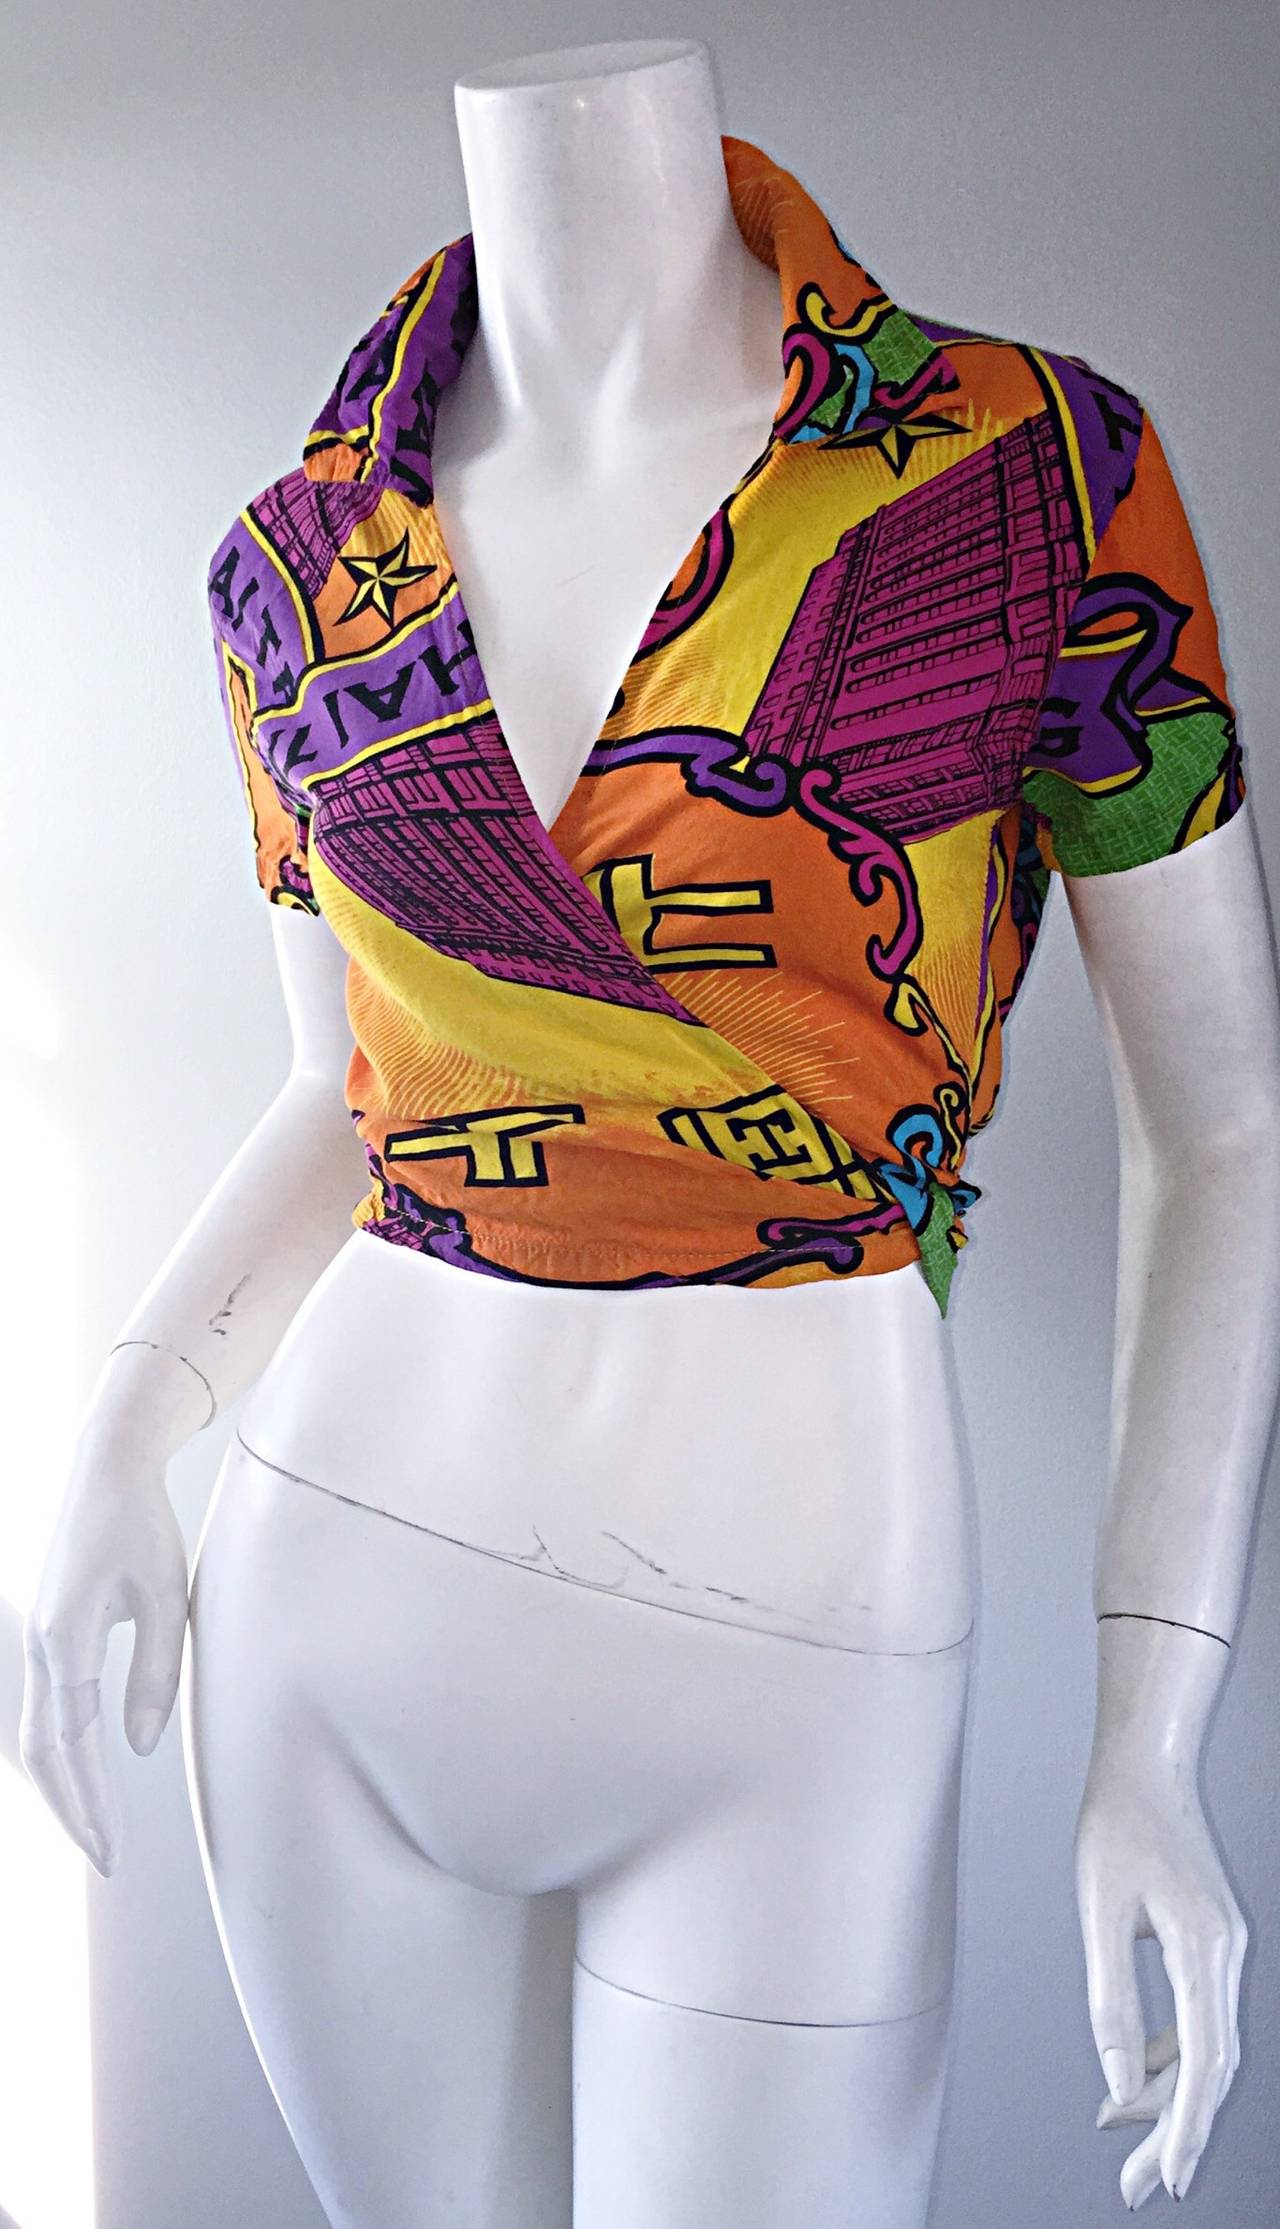 Awesome 1990s Shanghai Tang cropped wrap blouse! From the first collection put out by Shanghai Tang in 1994. Vibrant colors, with graphic designs throughout. Wrap style that ties in the back. Great with jeans, shorts, skirts, or trousers. 100%